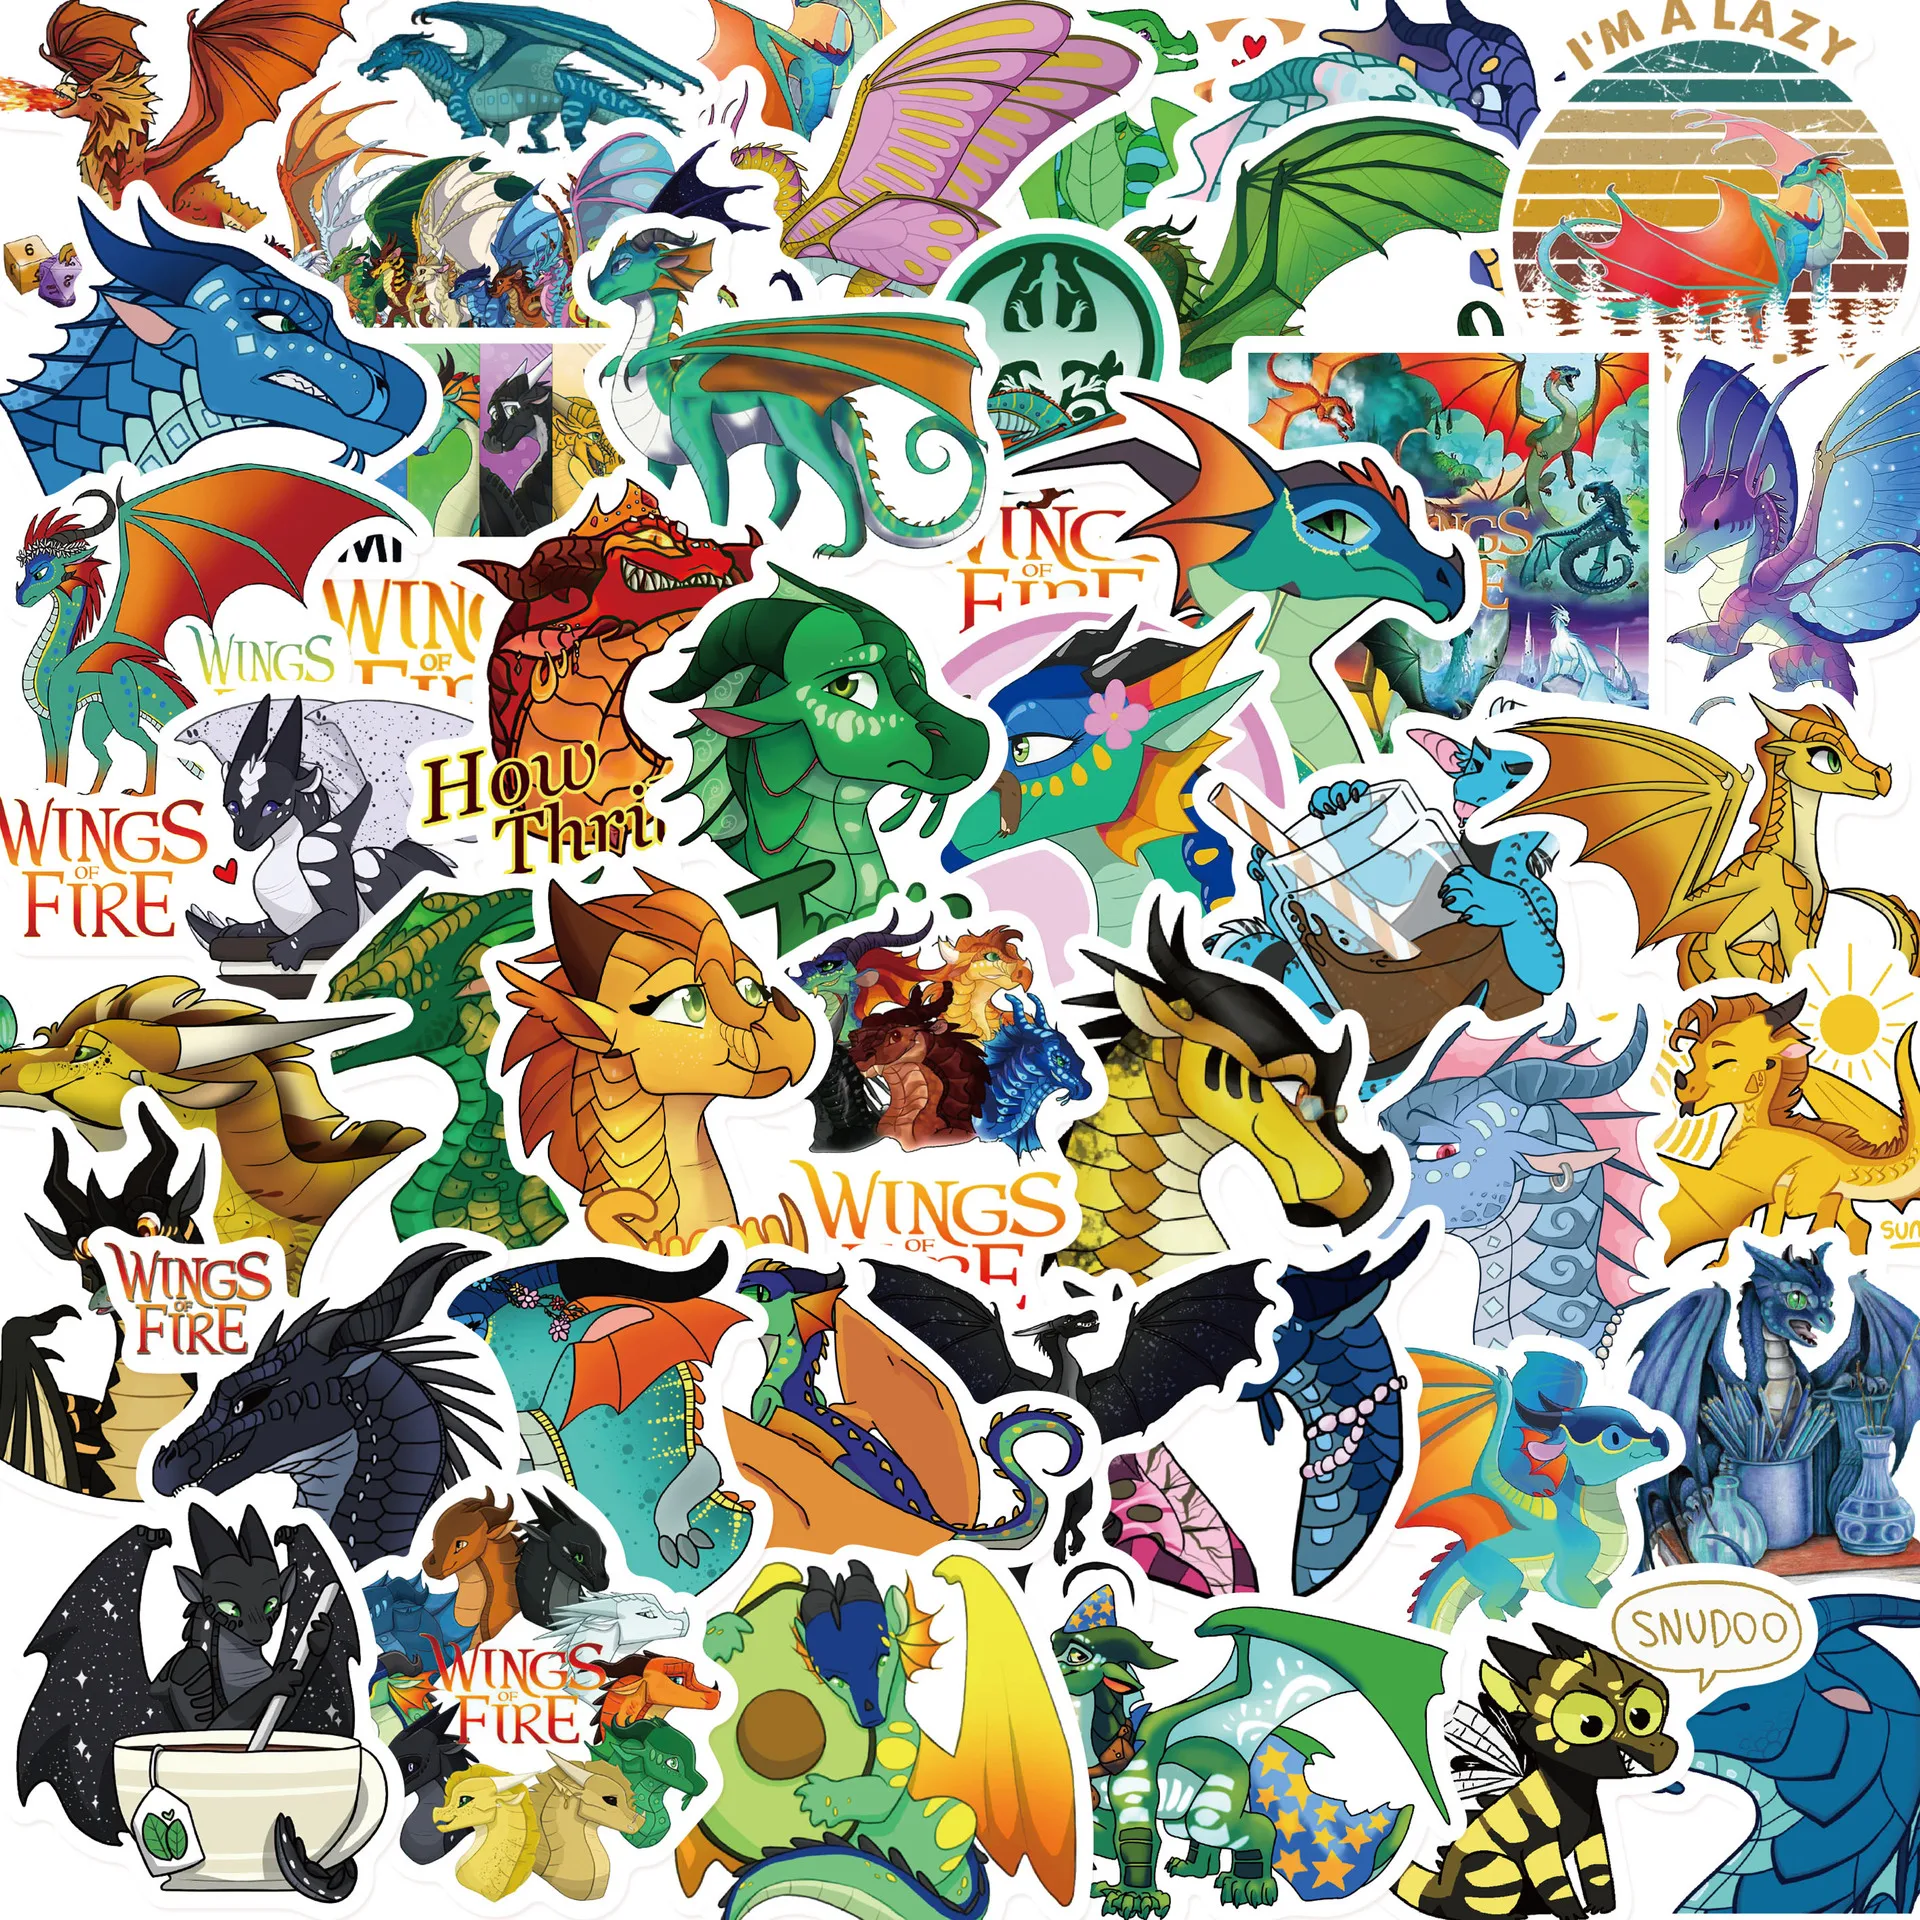 2 Style 50/60Pcs Cartoon Wings of Fire Stickers Flying Dragons Graffiti Stickers for DIY Luggage Laptop Bicycle Stickers 2 style 50 60pcs cartoon wings of fire stickers flying dragons graffiti stickers for diy luggage laptop bicycle stickers